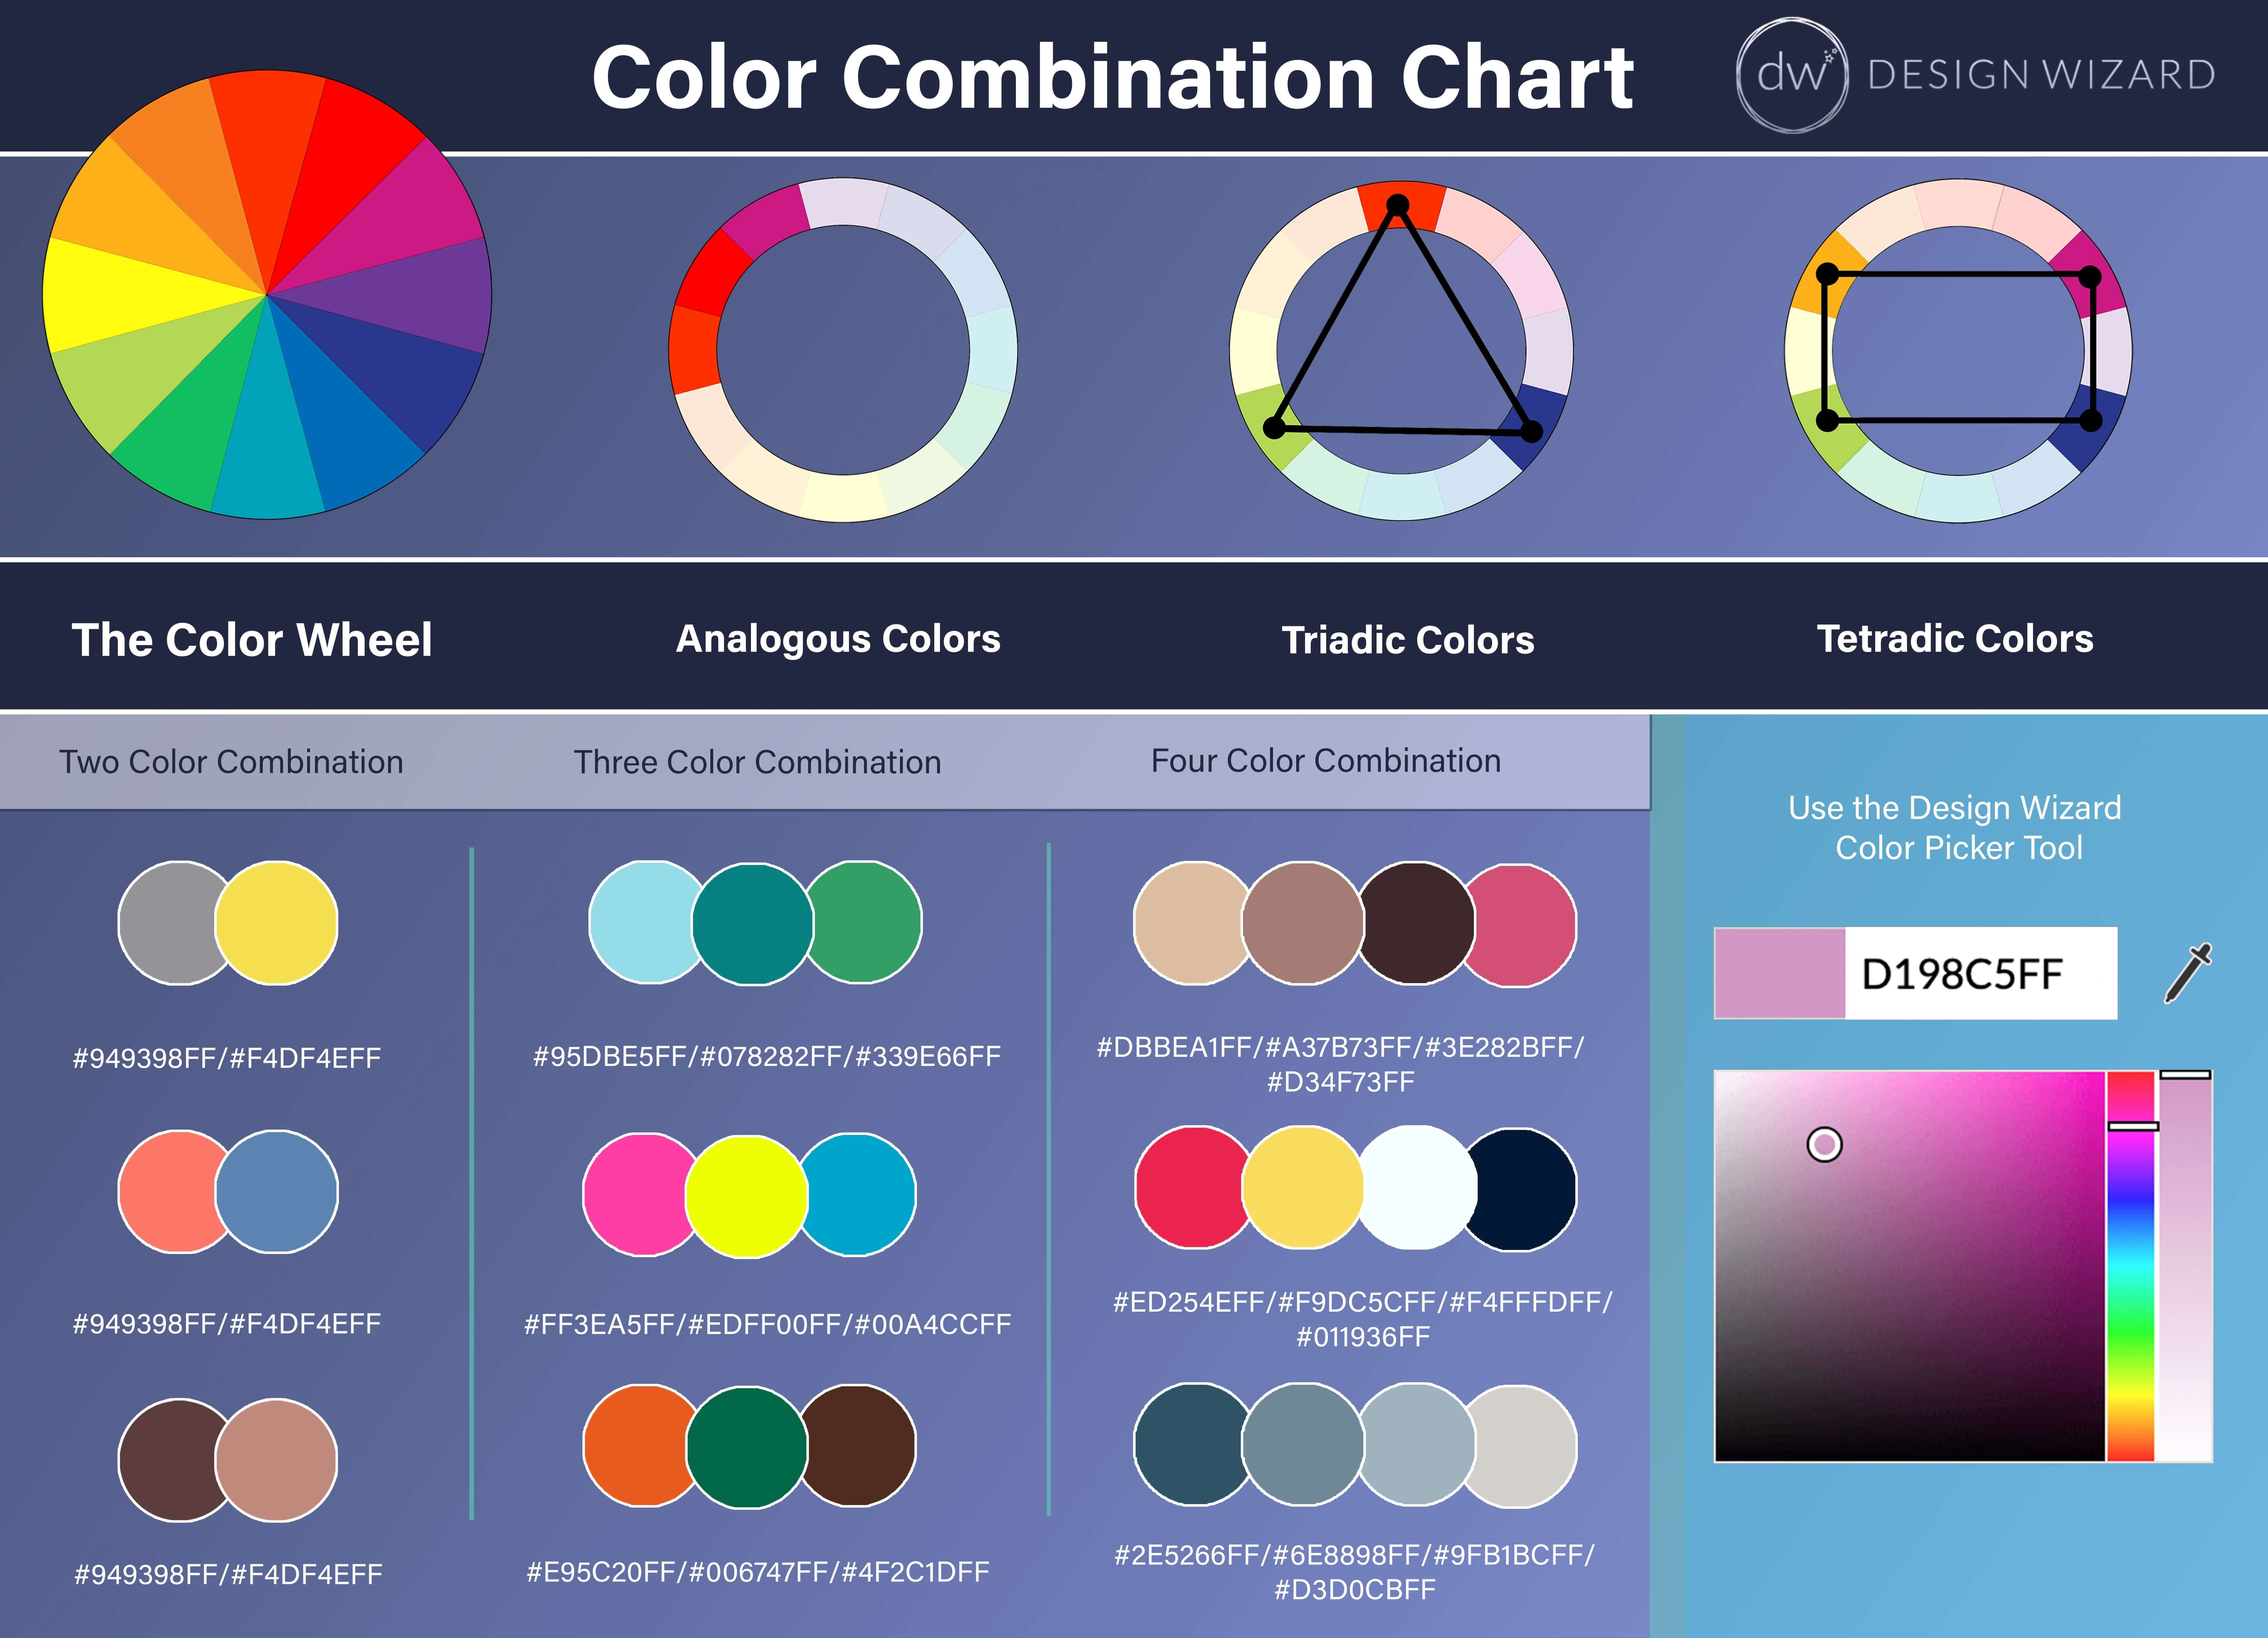 Color combination chart for color paletteCreation reference - The importance of a brand's color palette and how to choose the right colors - Image